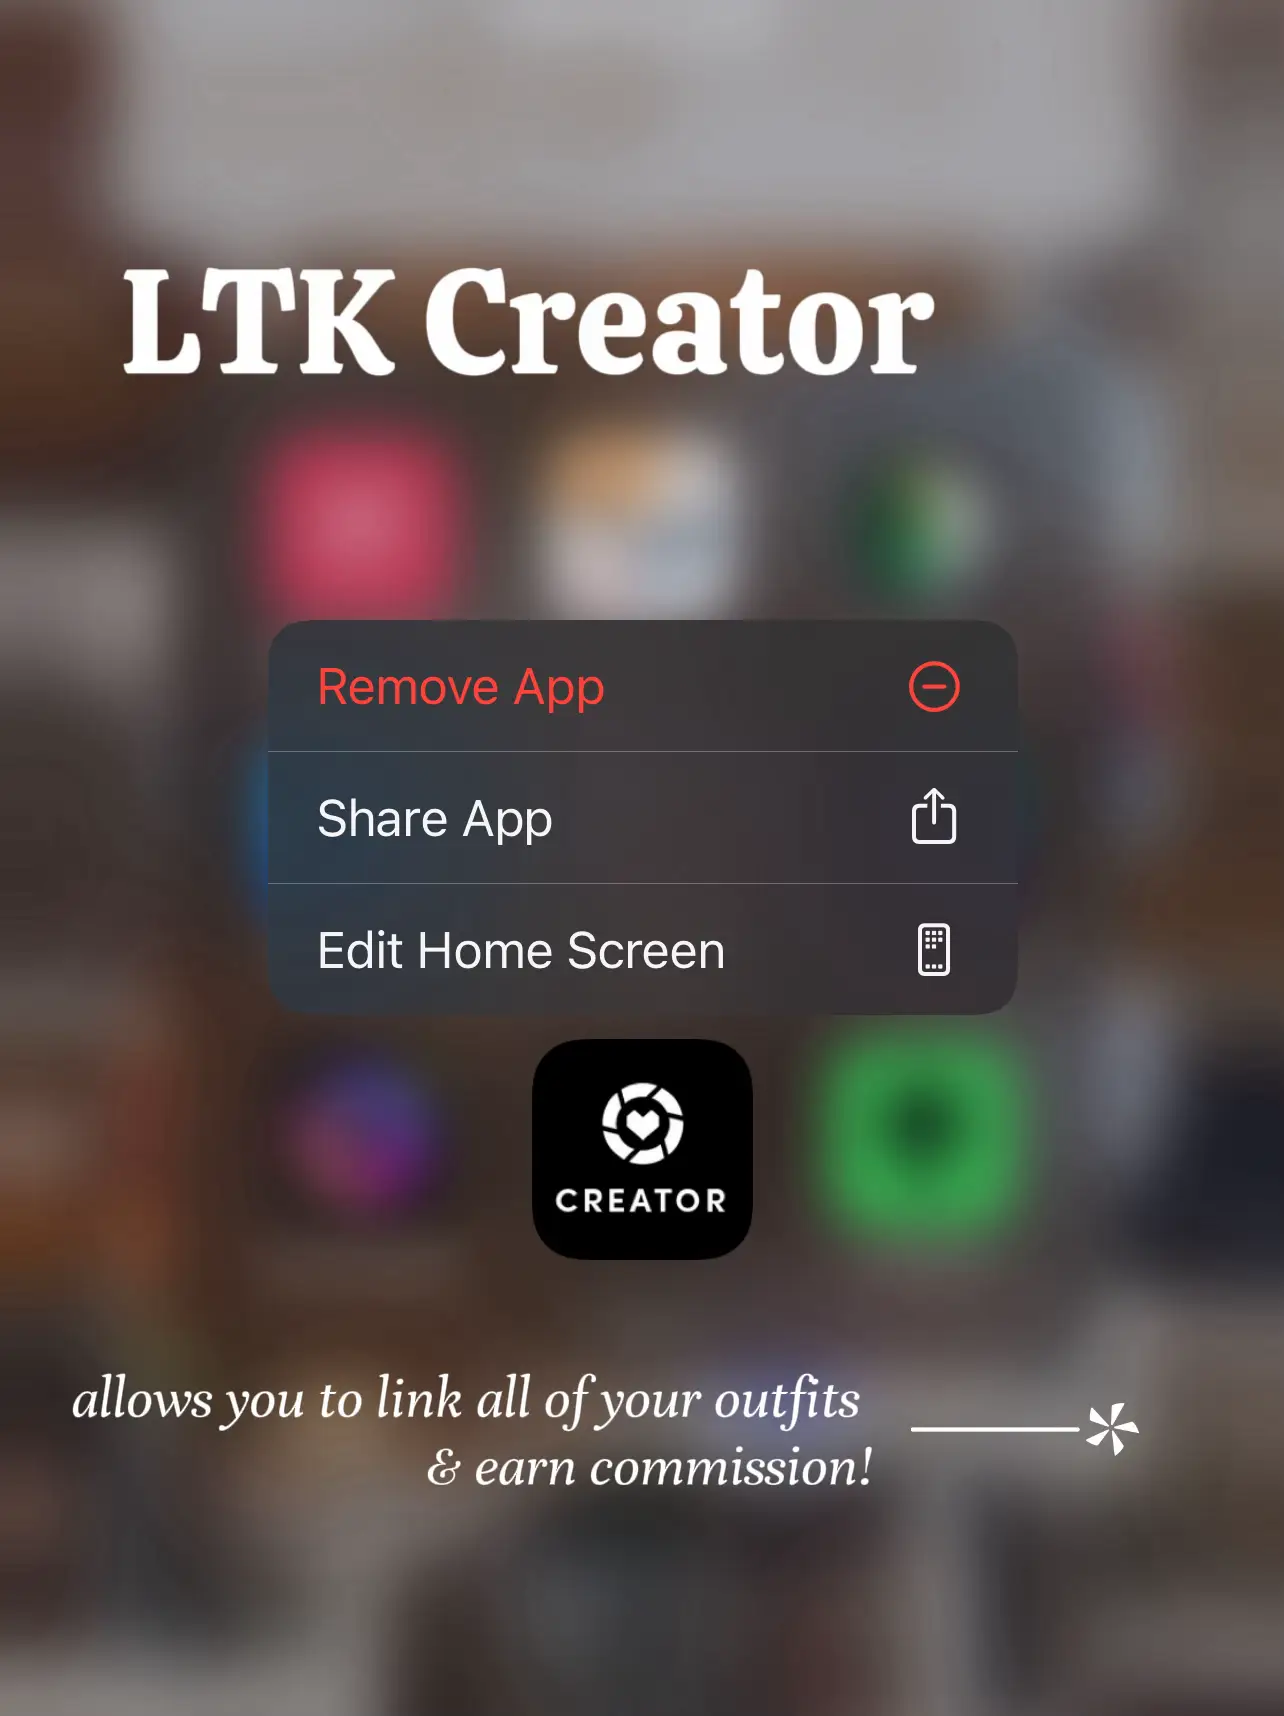 SHOPPING WITH LTK -- BEGINNER'S GUIDE: Learn how to Save Time